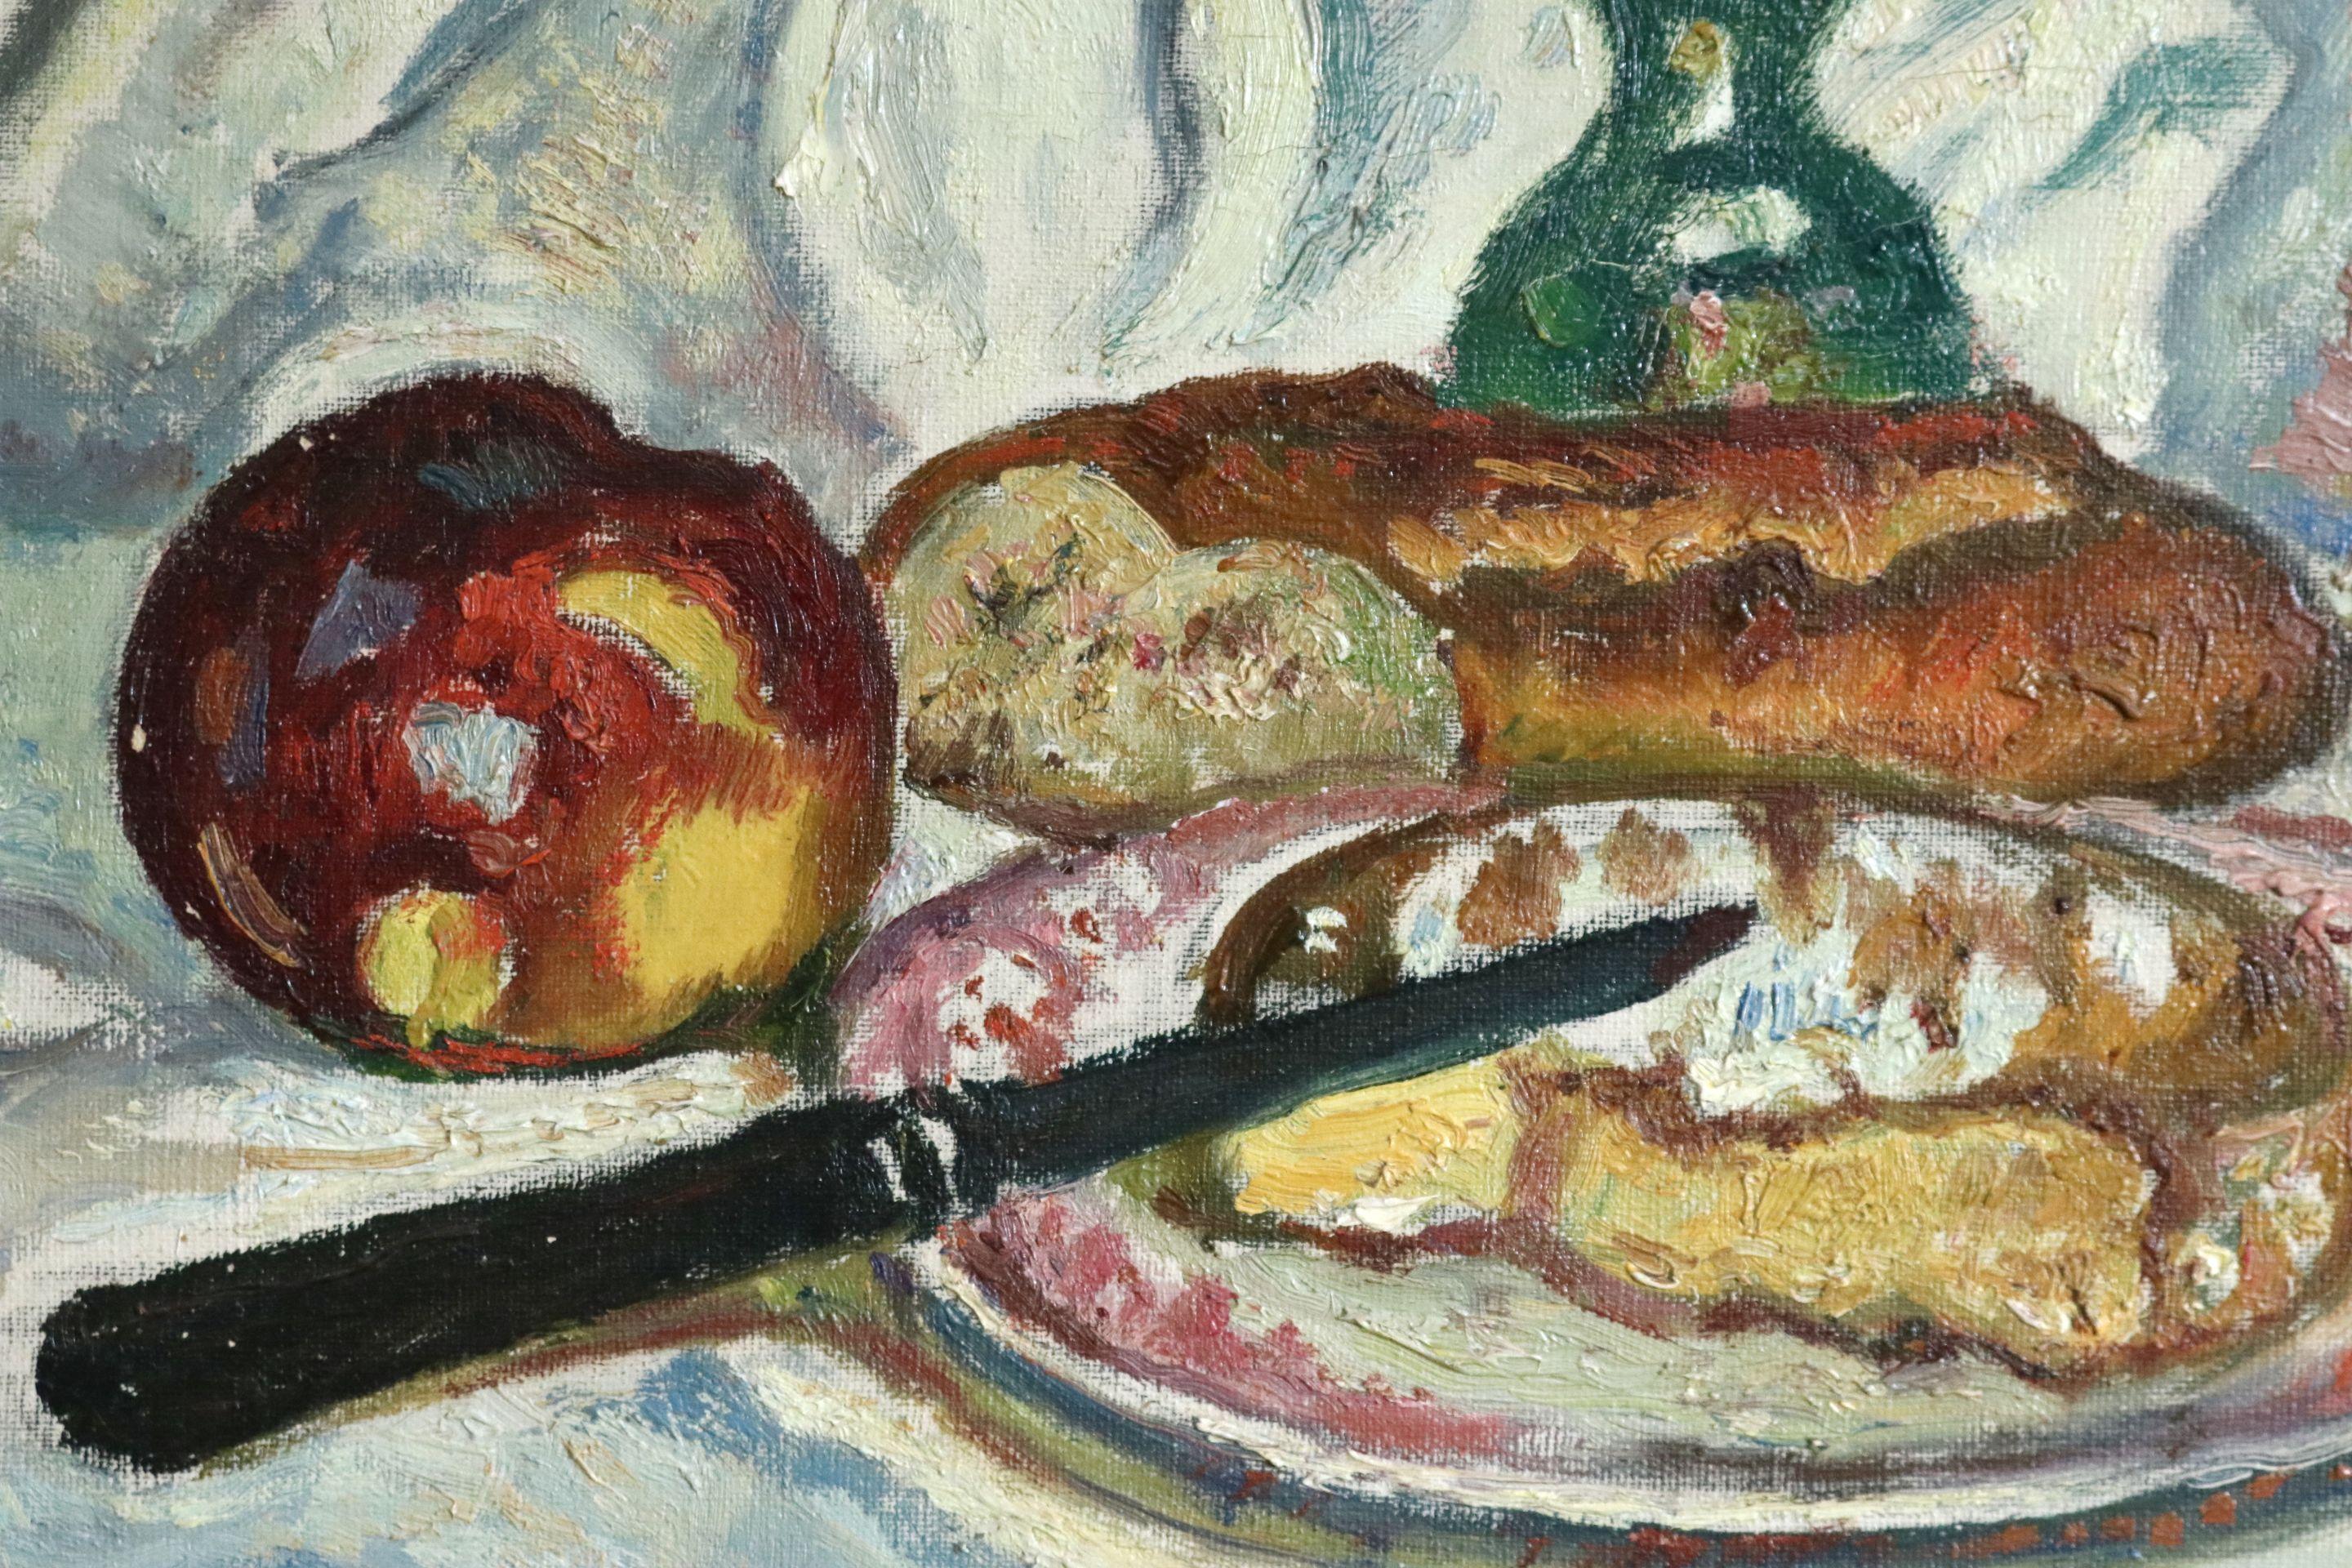 Oil on canvas circa 1930 by Henri Liénard de Saint-Délis. A still life of a lunch of cheese, bread and fruit. Signed lower right. Framed dimensions are 17 inches high by 20 inches wide.

Henri Liénard de Saint-Délis was the son of a Dragoons officer